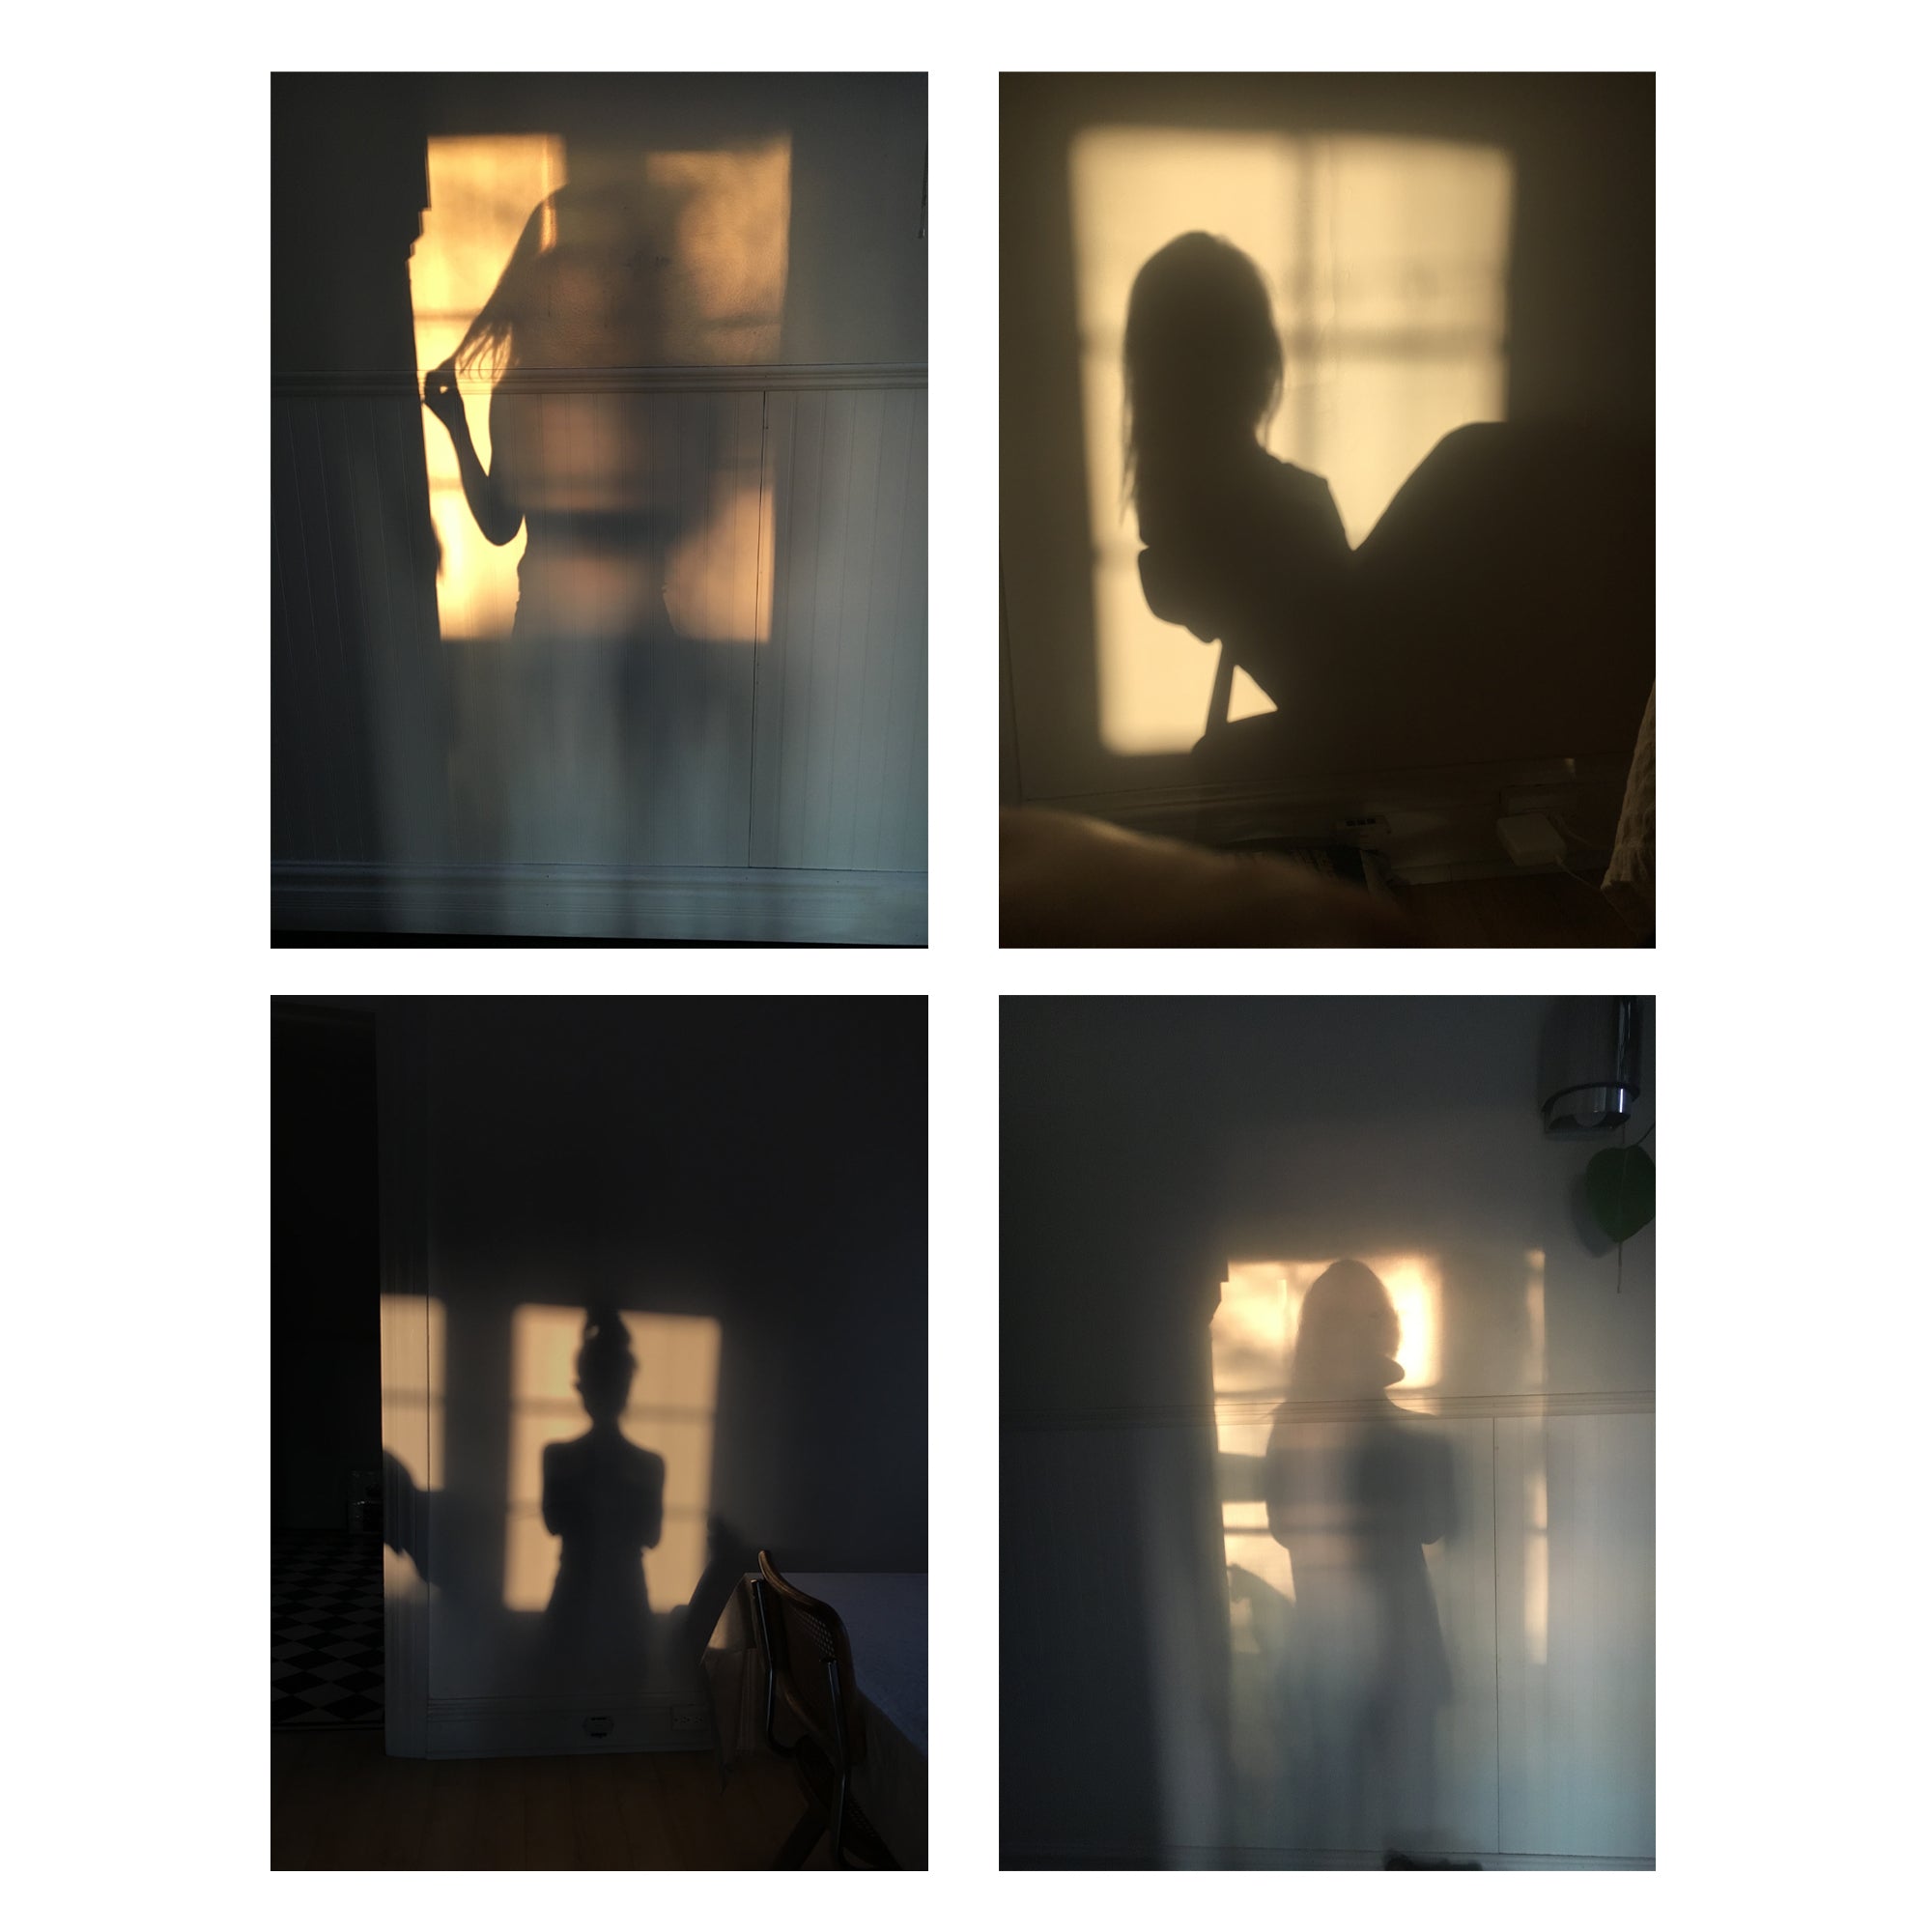 Lauren Kolyn - Various images taken at home in the evening light of my apartment. 2017-2020.